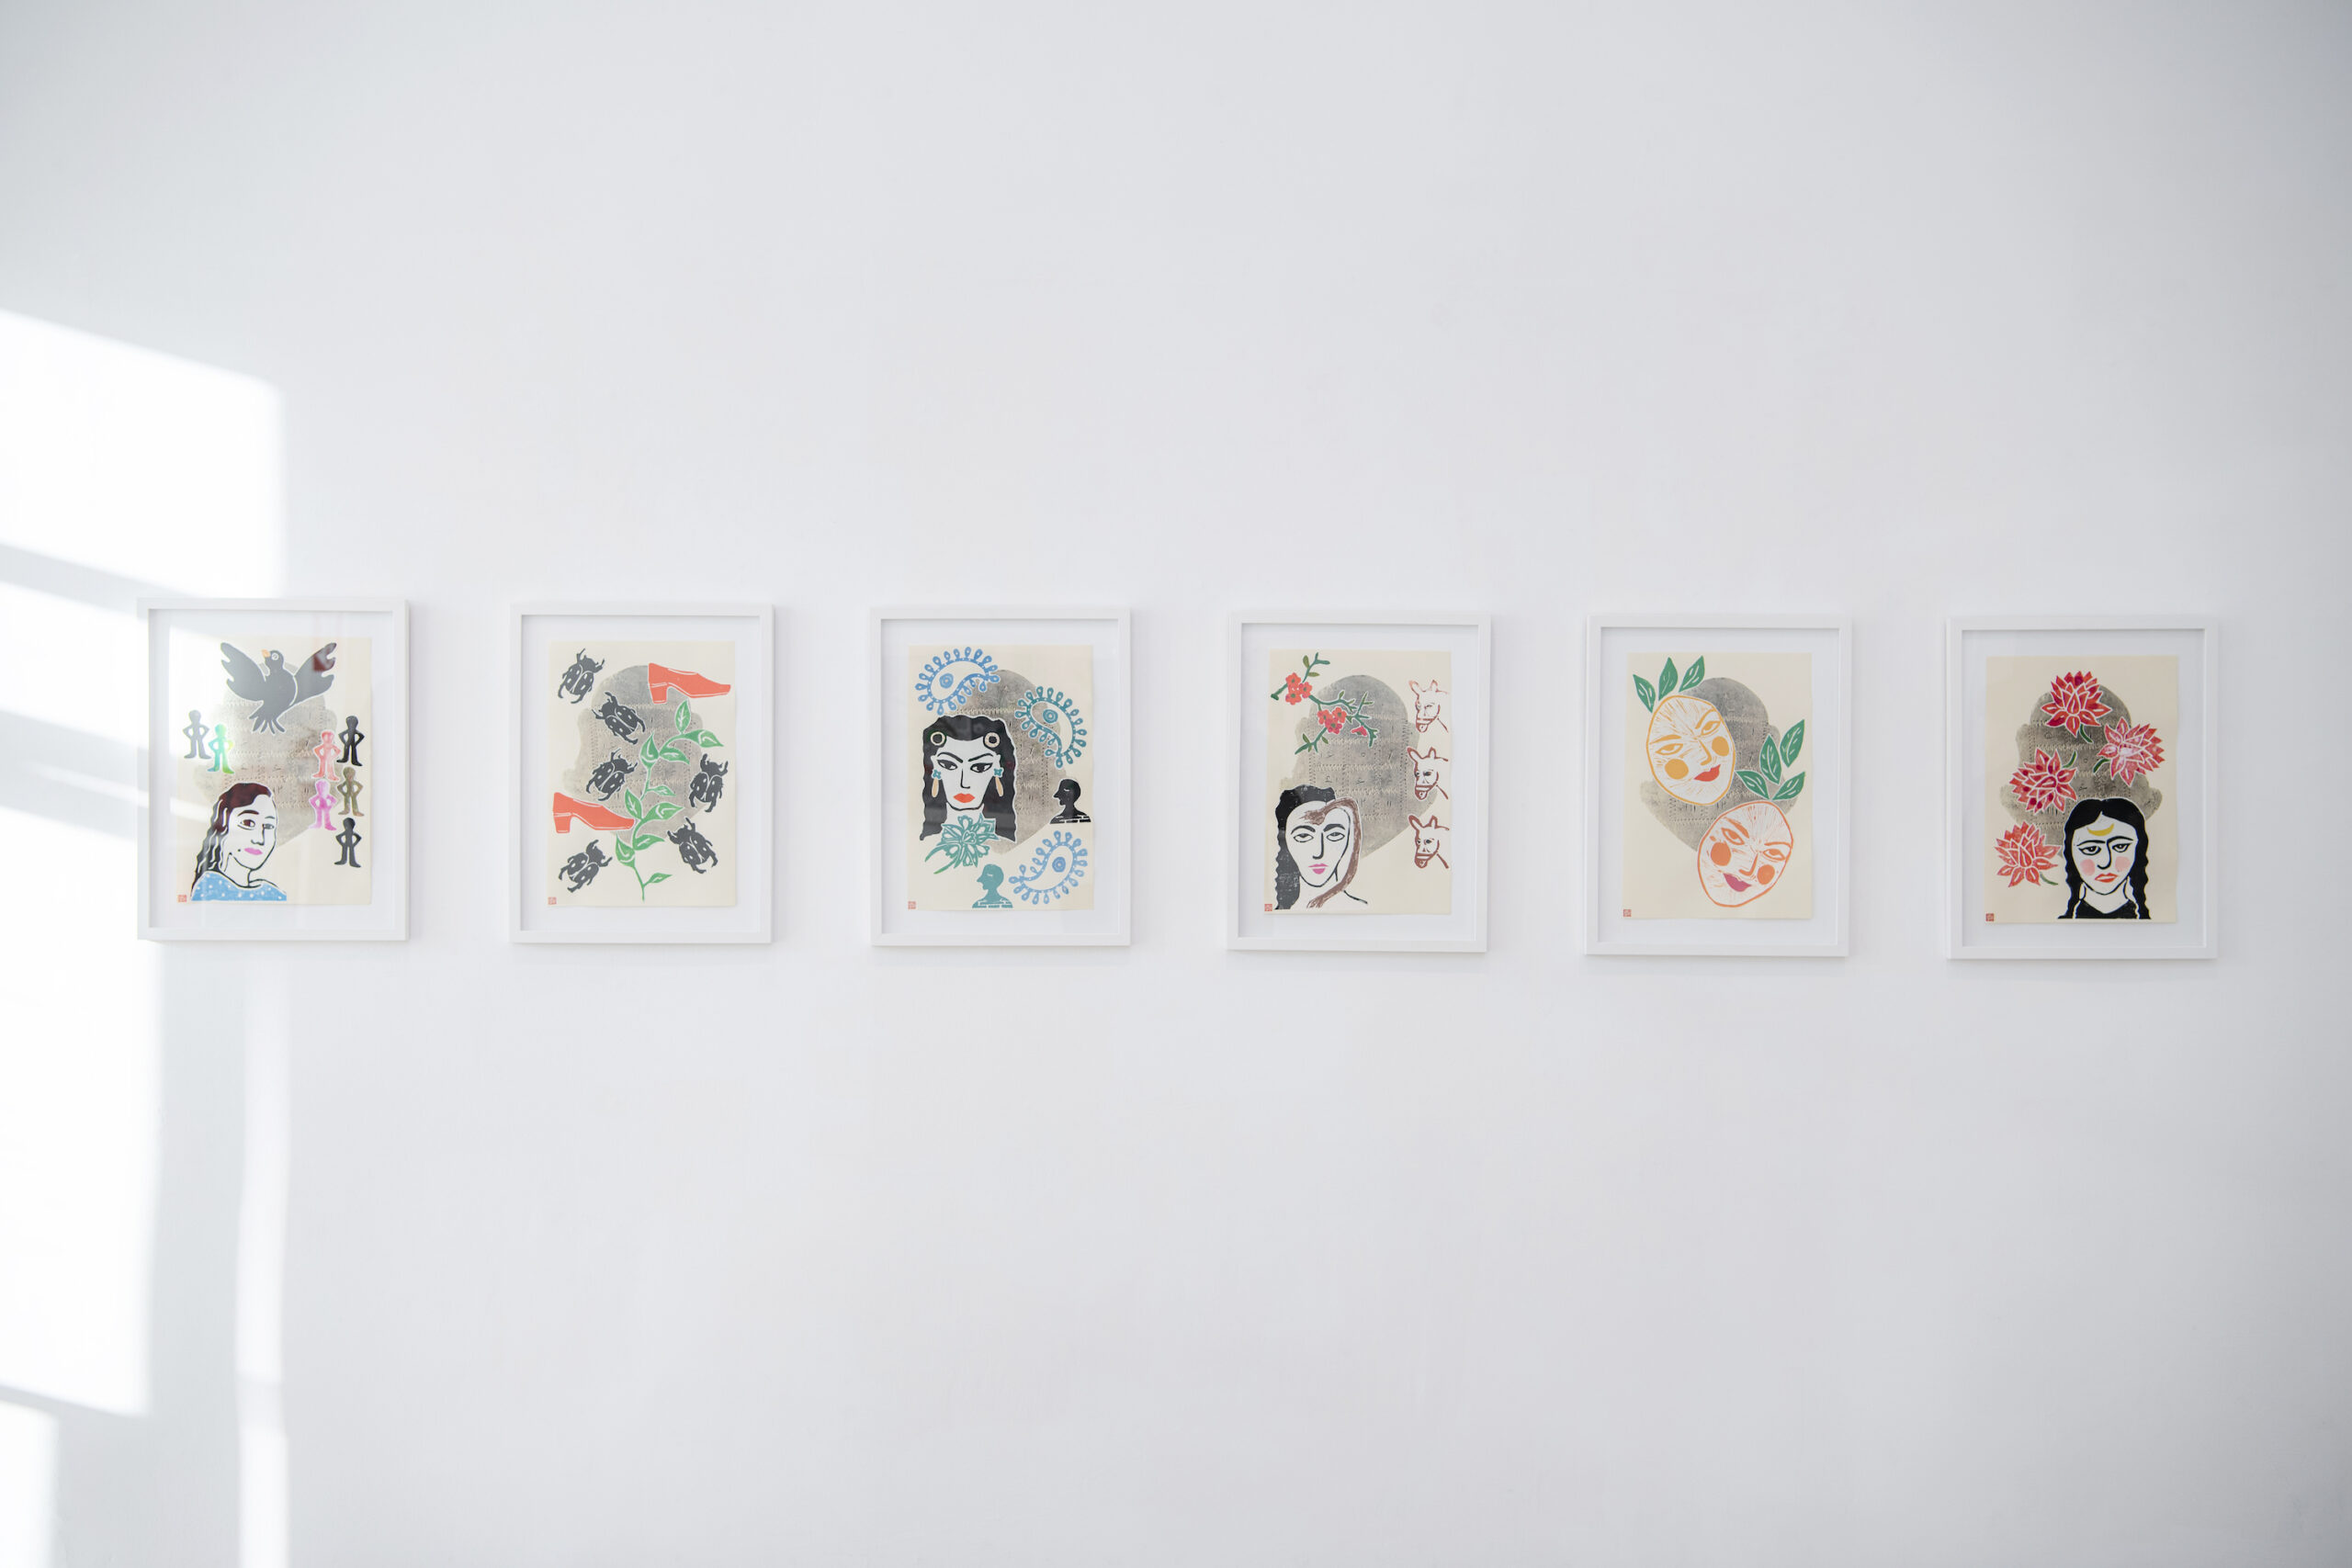 Installation from "Searching for Myself in the Forest of Bewitchment," featuring six linocut print collages on paper by Iranian artist Afsoon